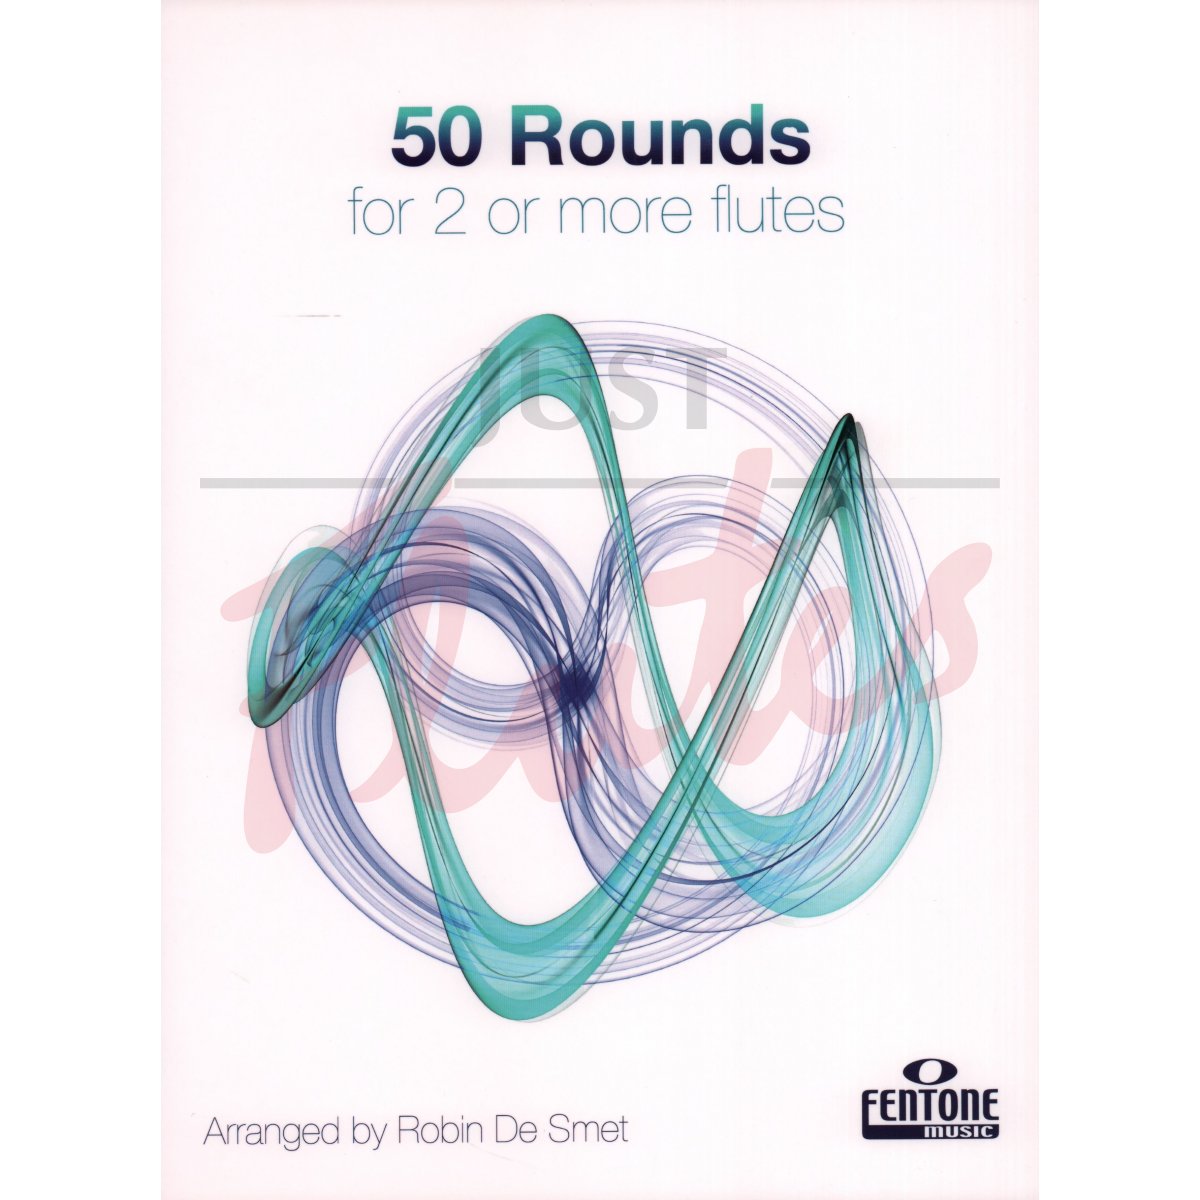 50 Rounds for 2 or more Flutes